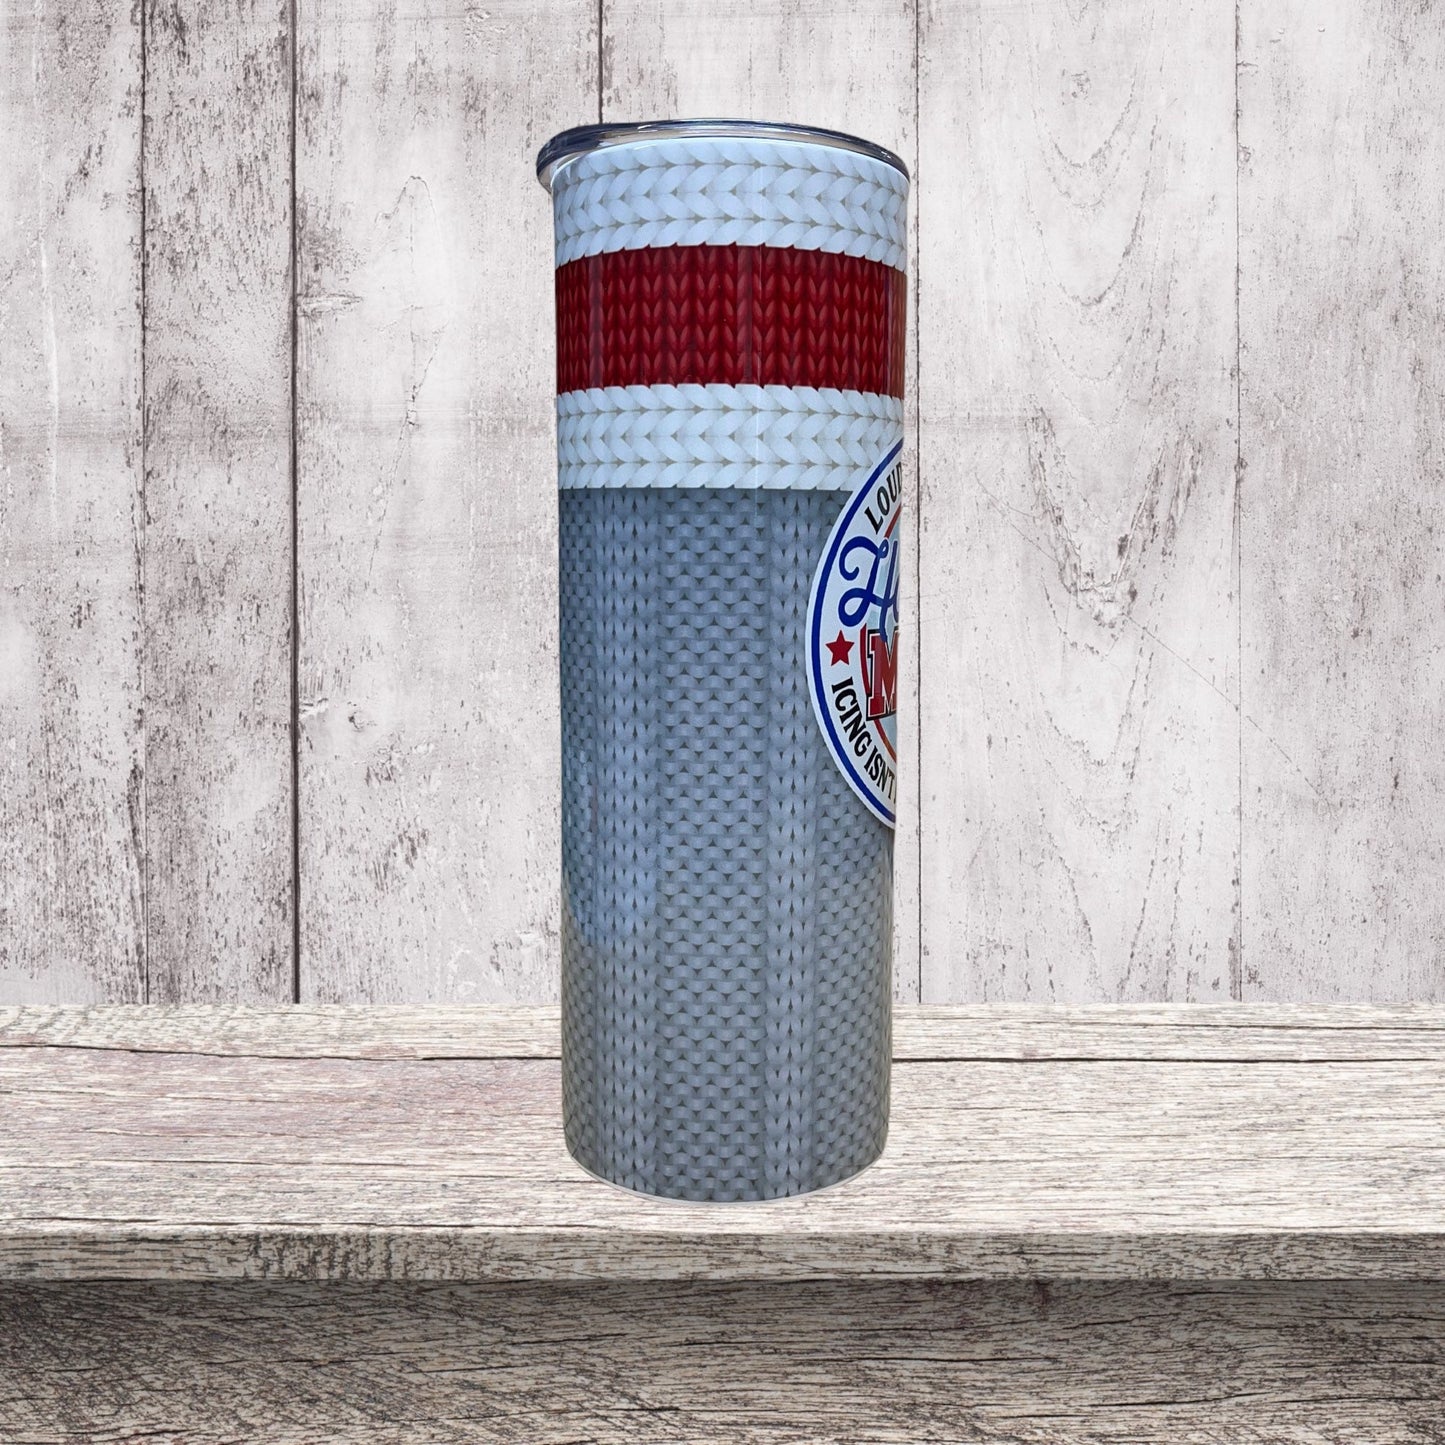 Hockey Mom don’t puck with me. Classy till the puck drops tumbler